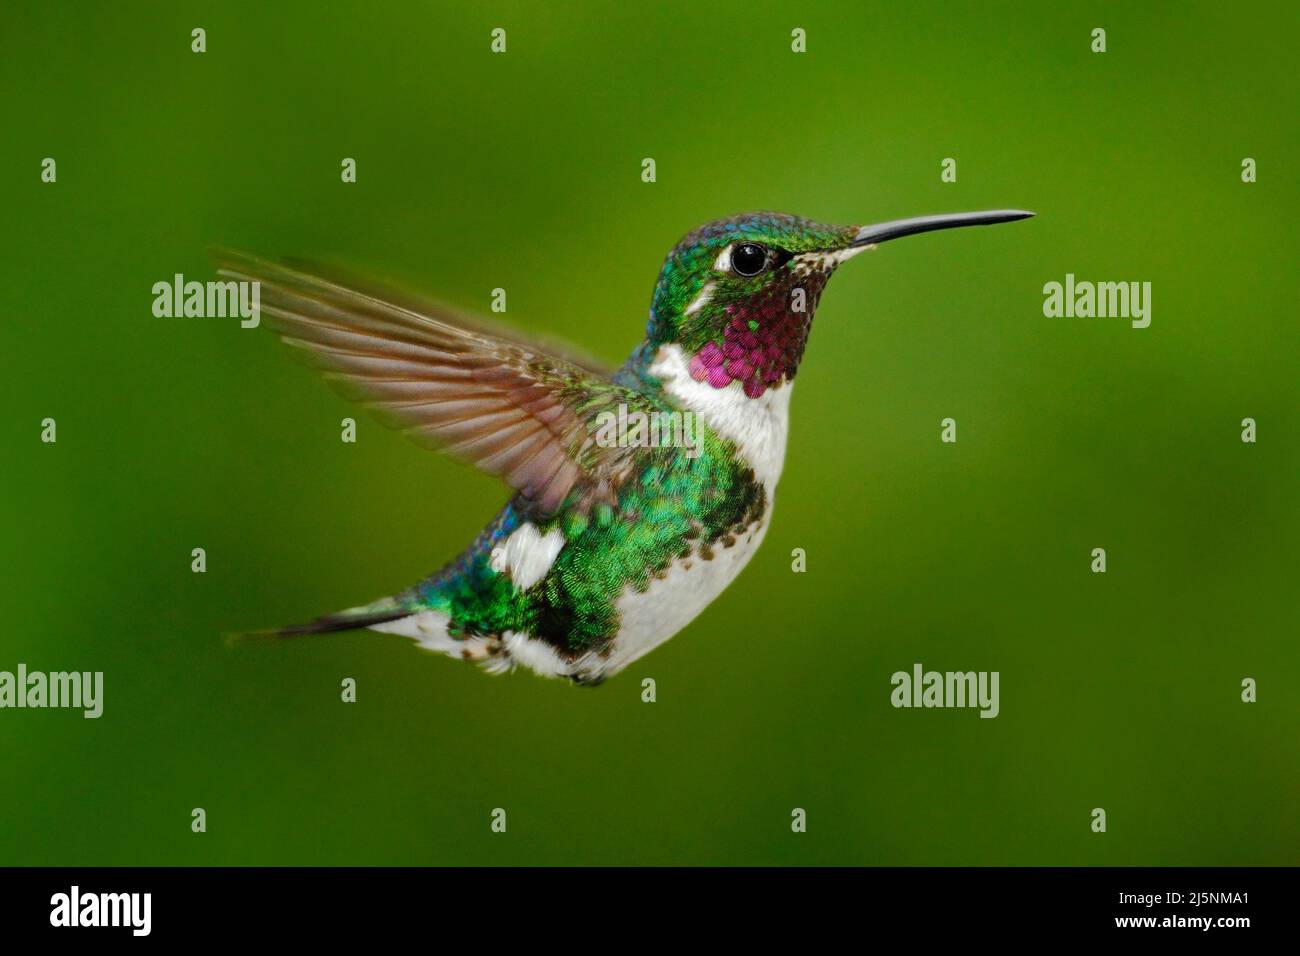 Tinny hummingbird. White-bellied Woodstar, hummingbird with clear green background. Bird from Tandayapa. Hummingbird from Ecuador. Hummingbird in natu Stock Photo